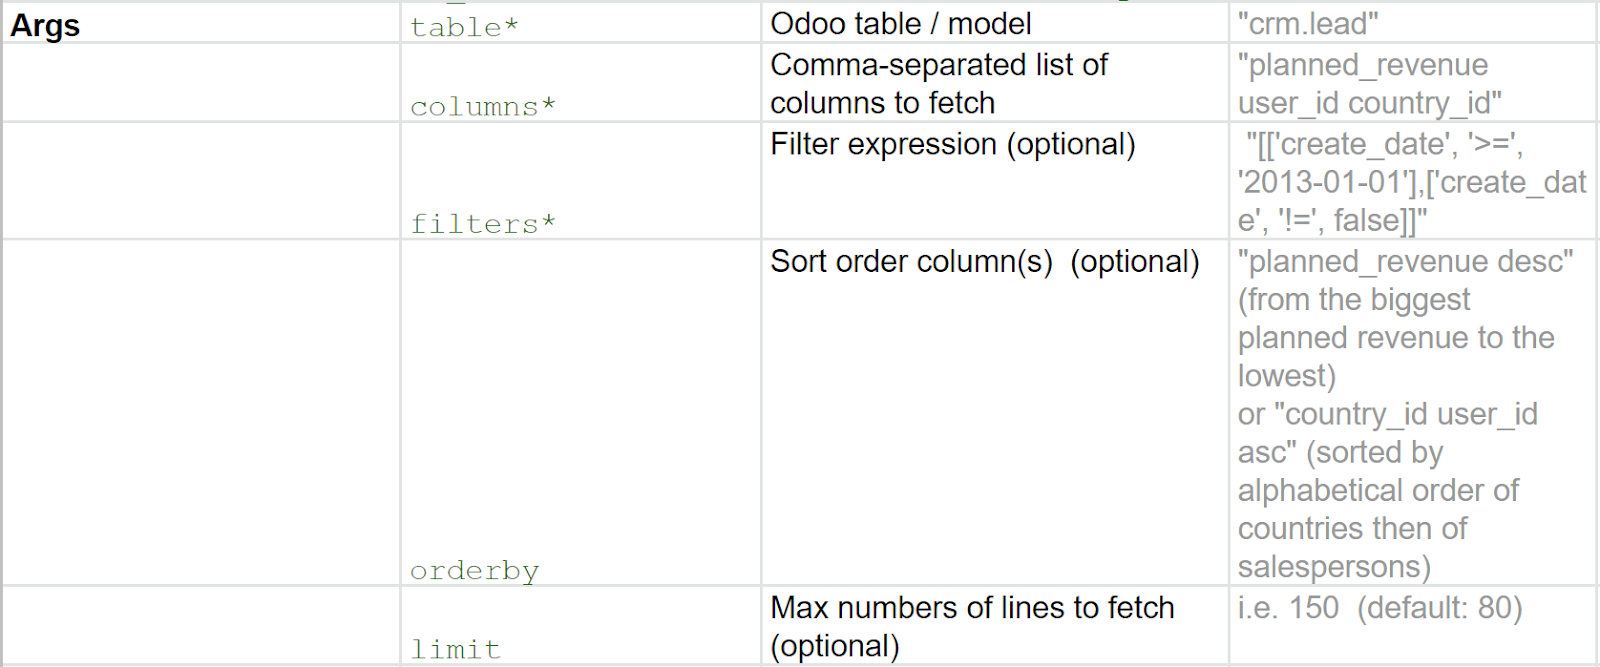 Table with examples of arguments to use in Odoo